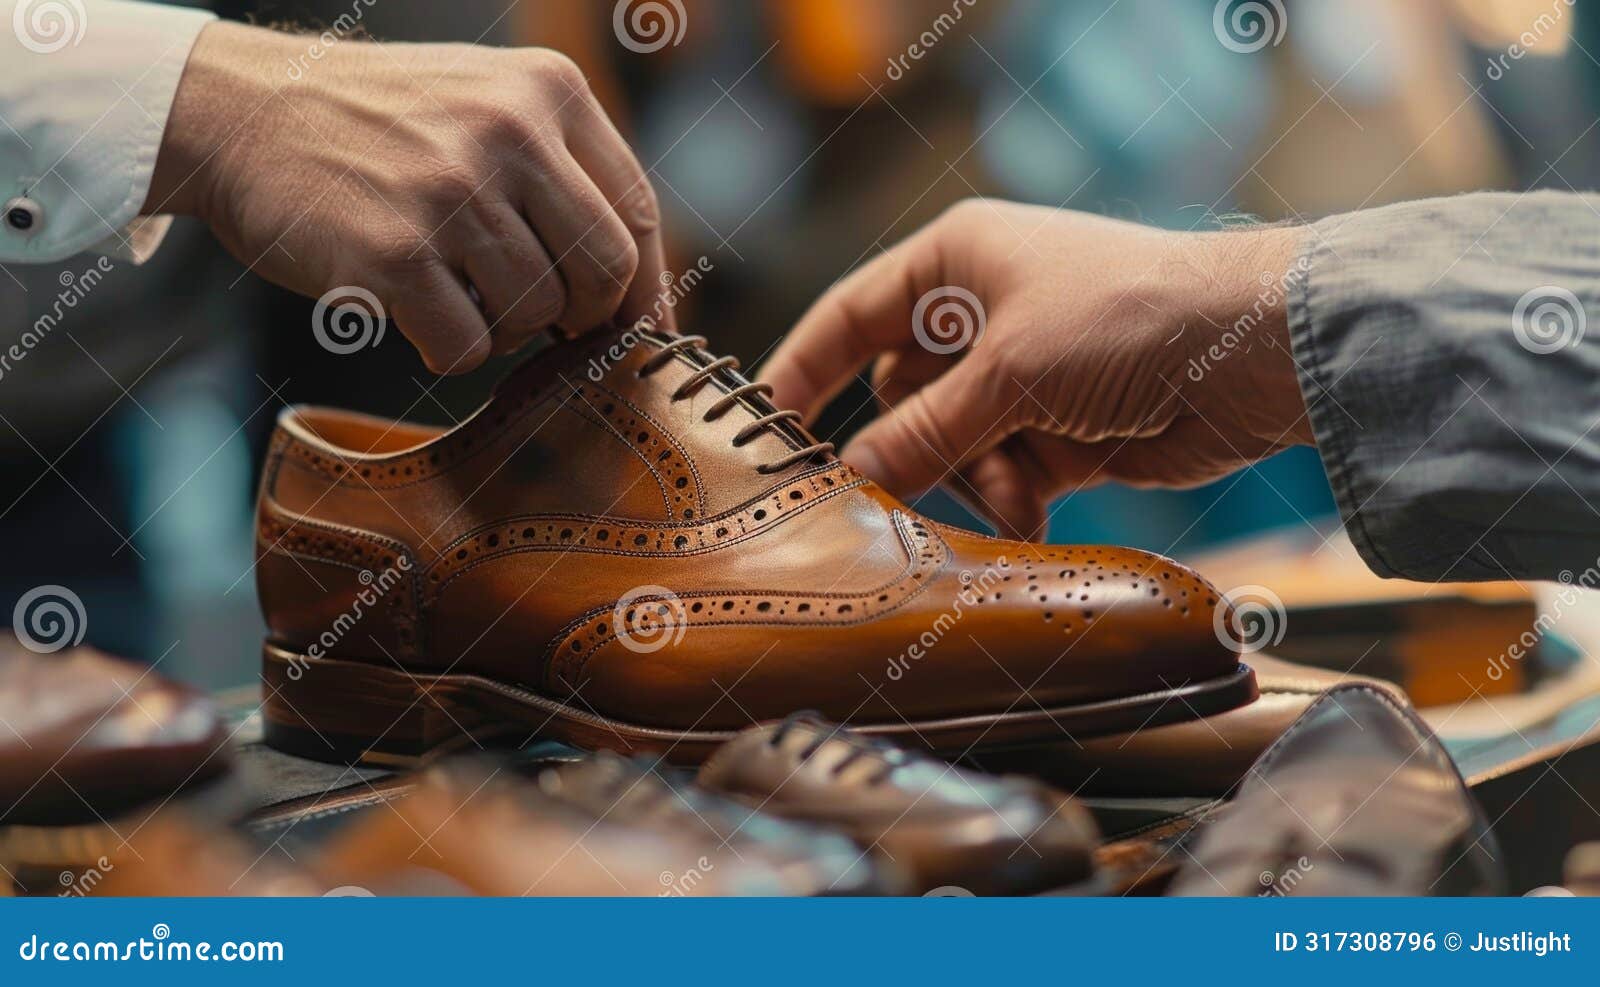 finetuning the fit of a bespoke shoe as the customer tries it on for the first time